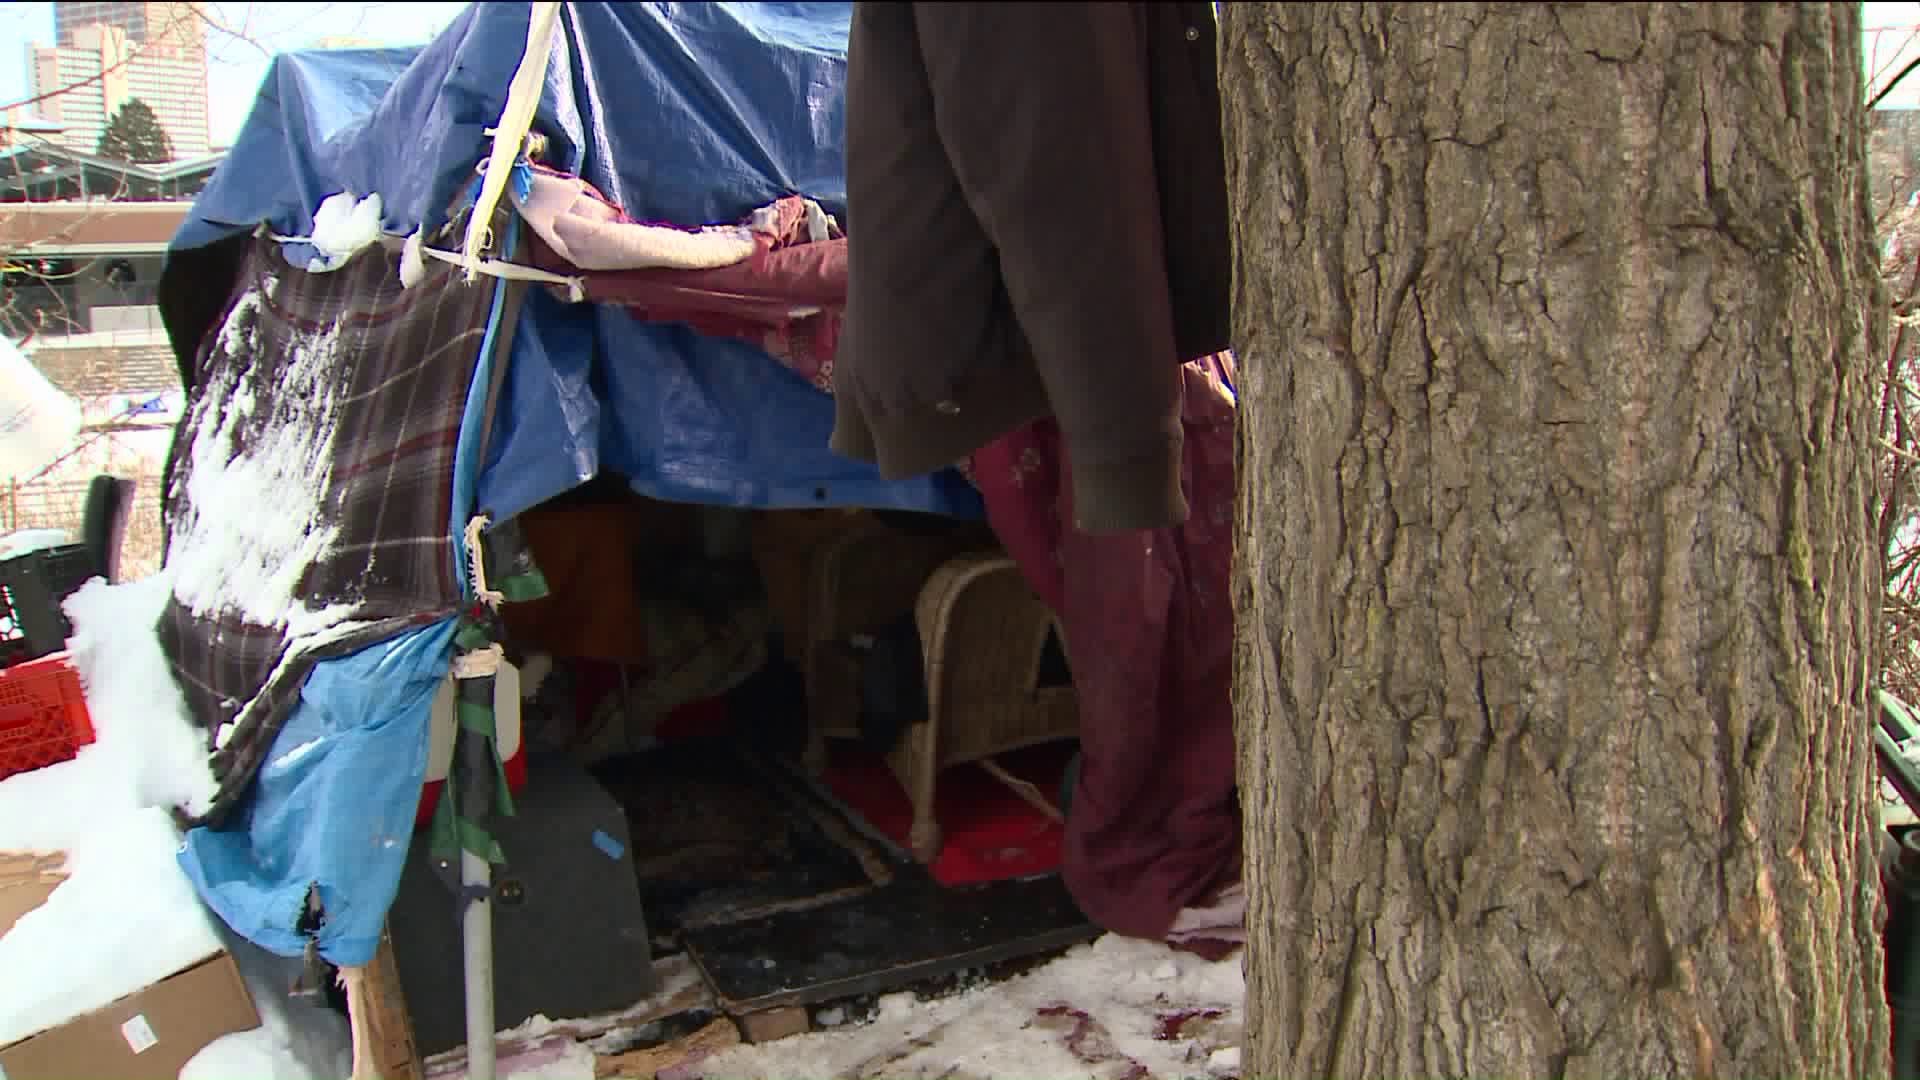 Hartford Police `Cold Patrol` getting homeless folks to safety